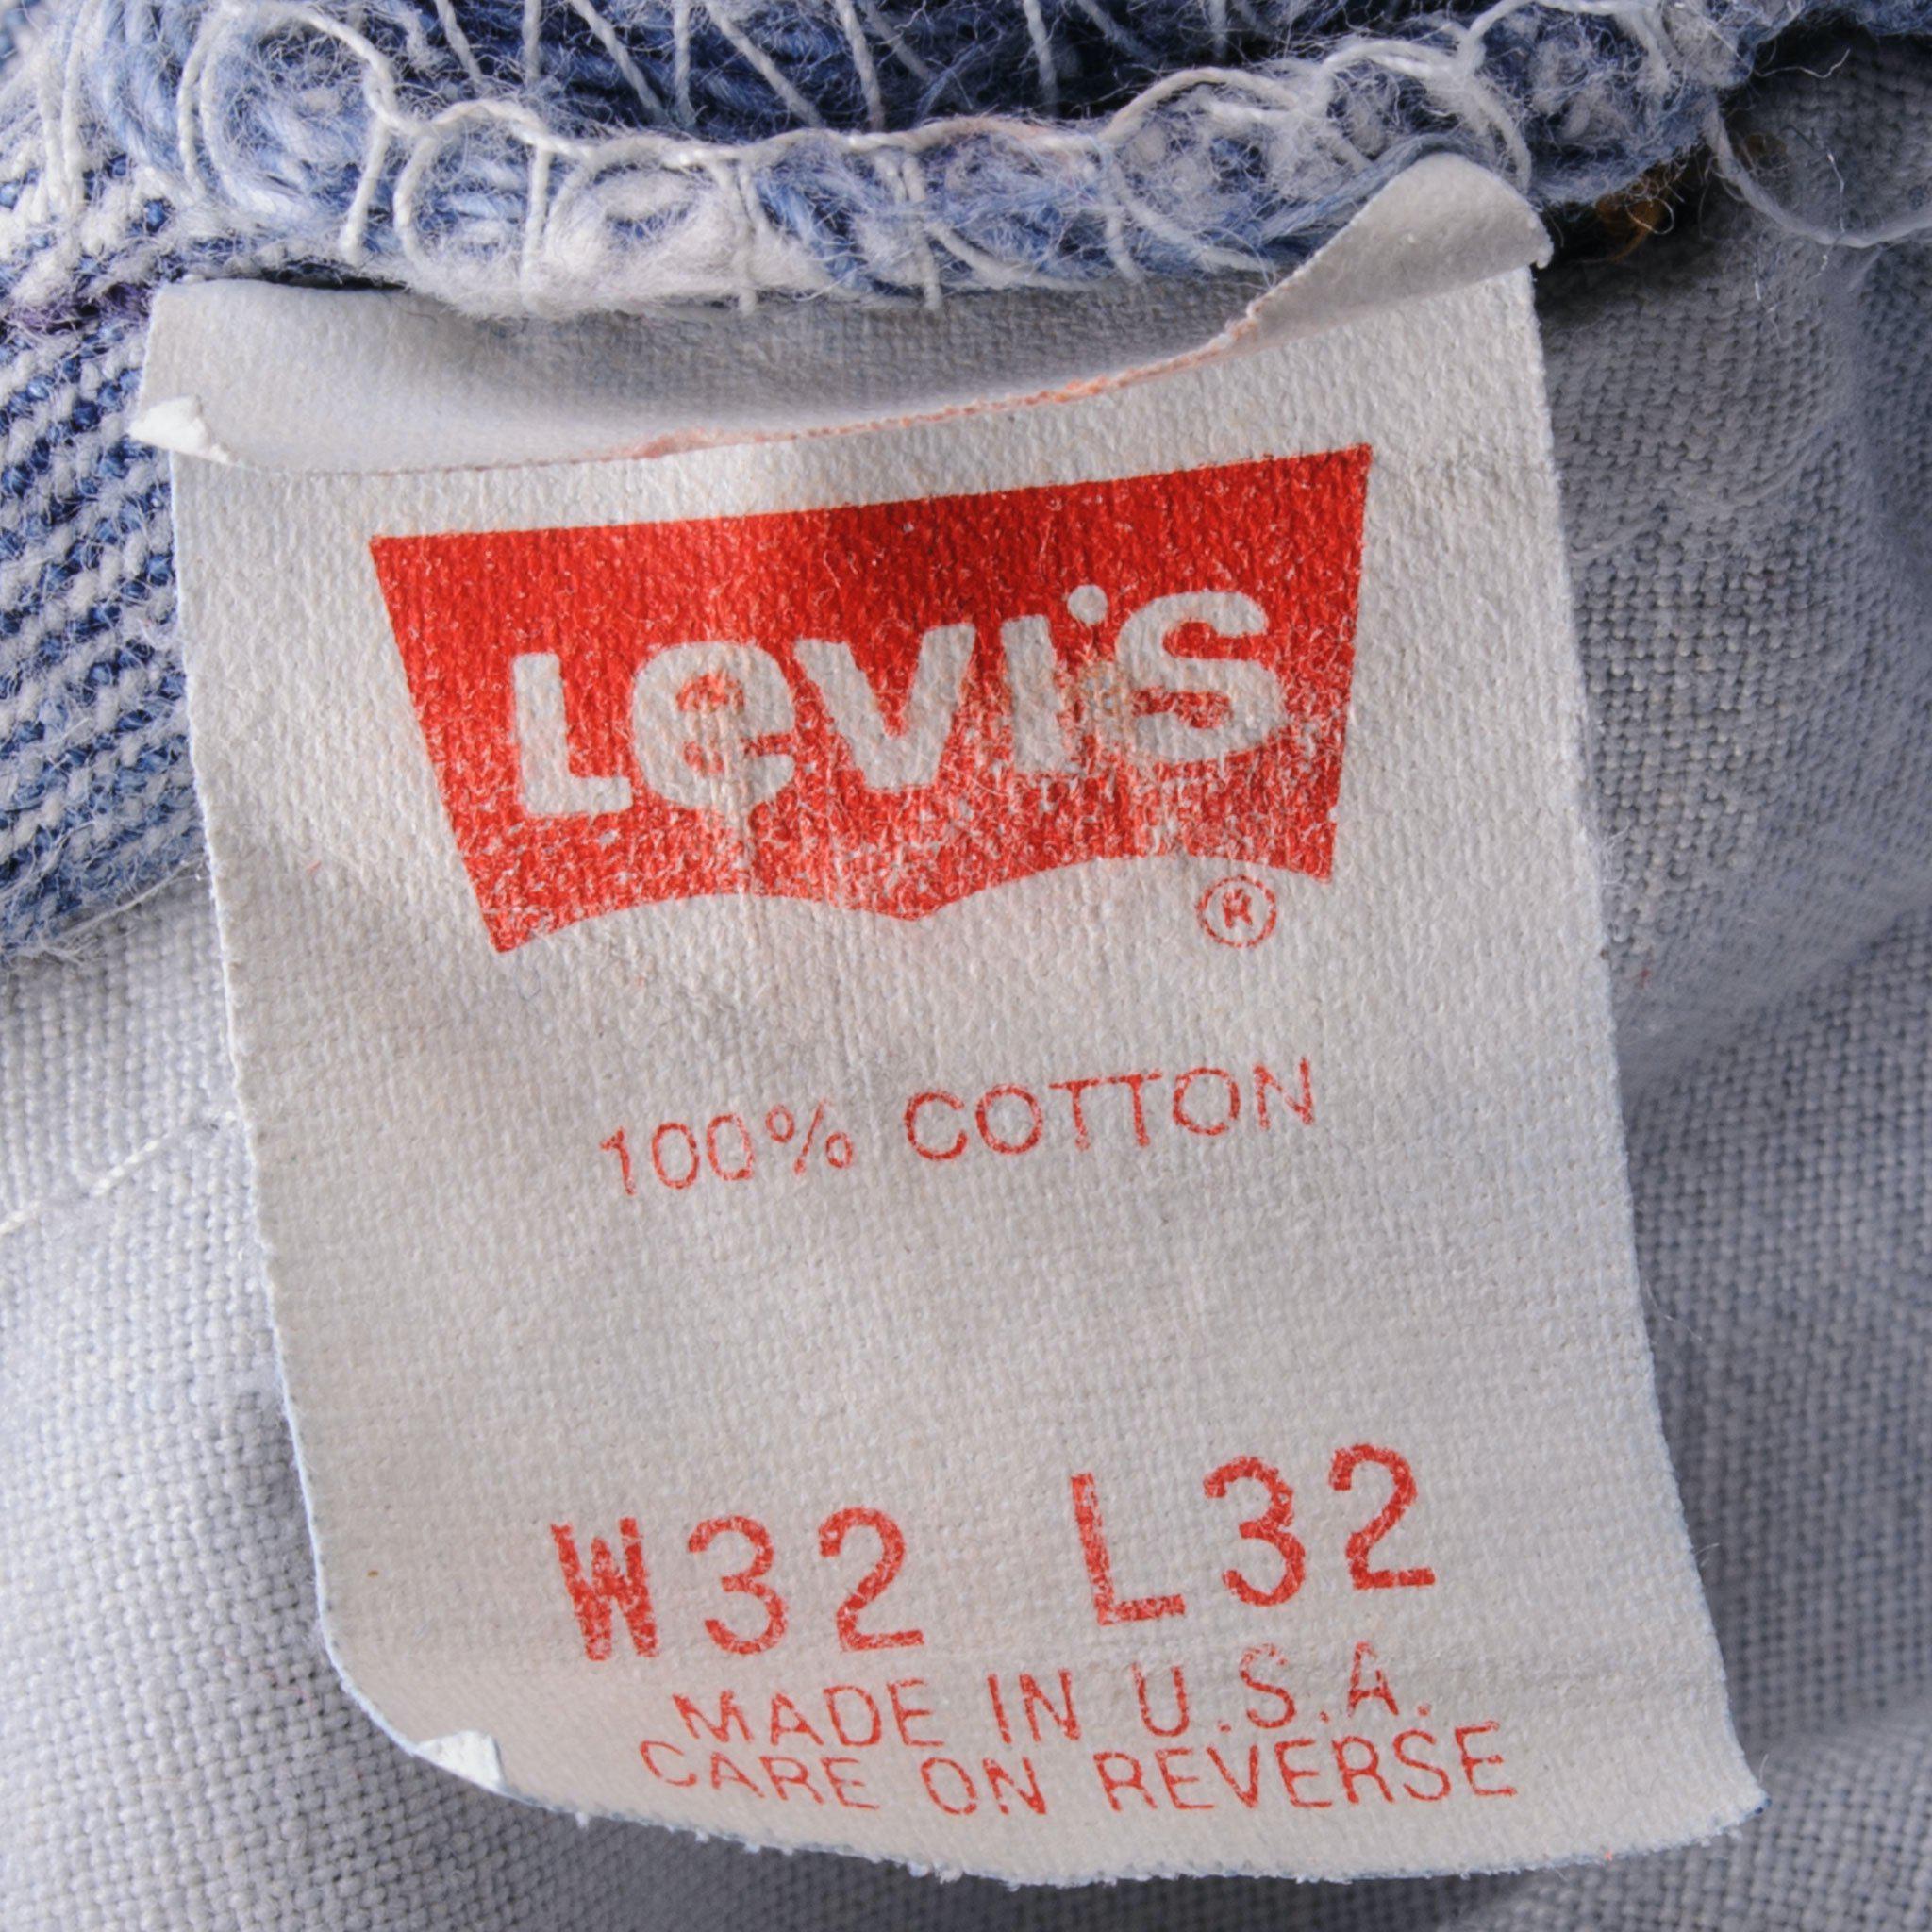 VINTAGE LEVIS 501 JEANS 1988-1993 INDIGO SIZE W32 L31 MADE IN USA